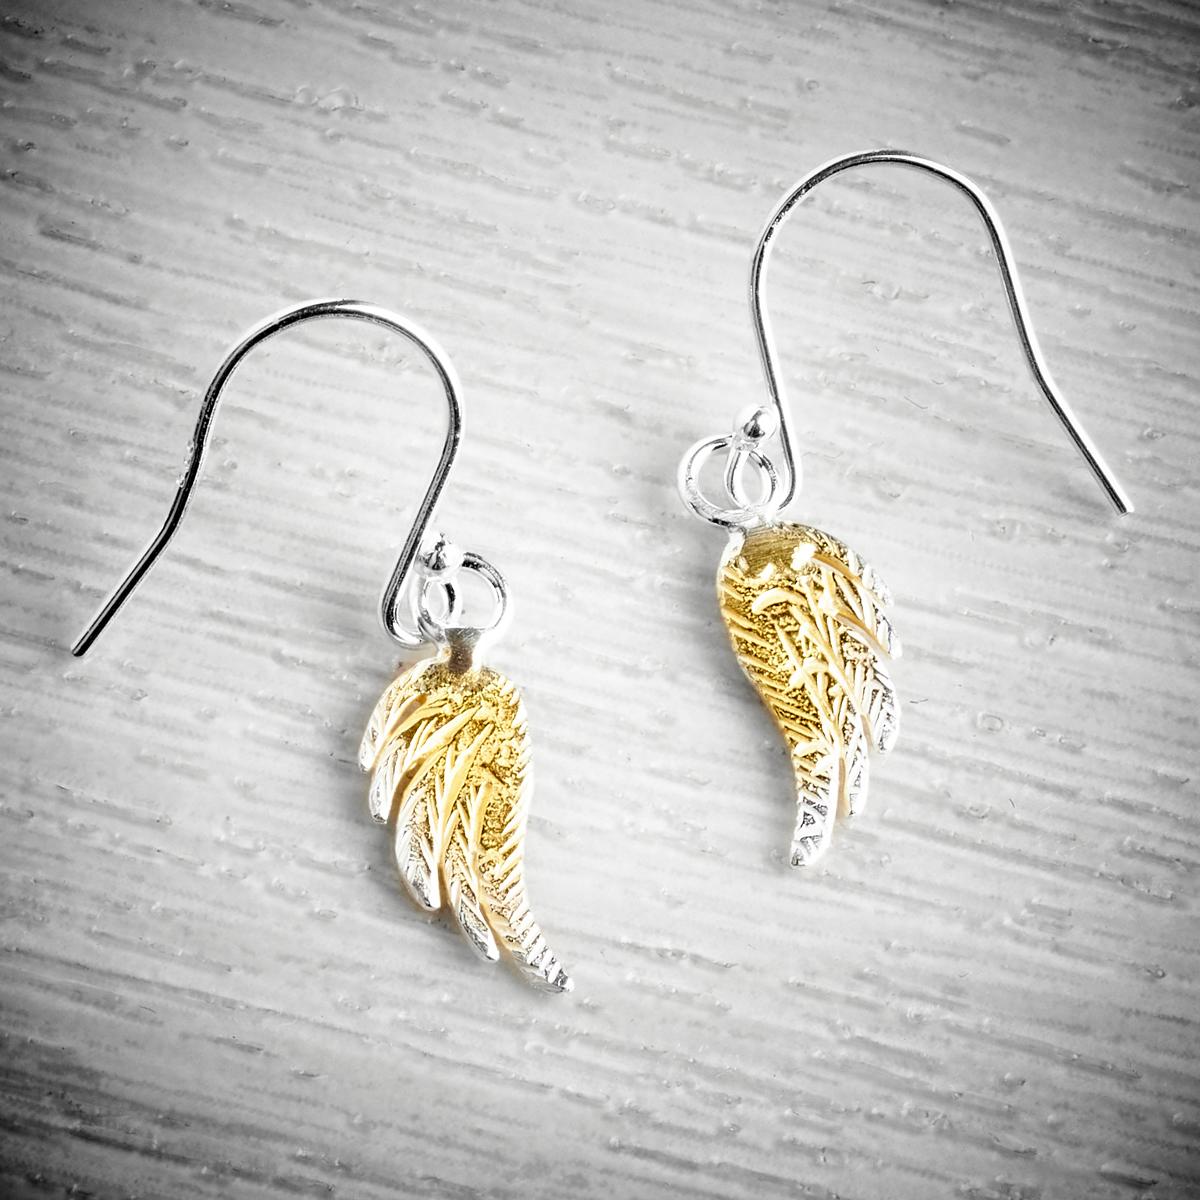 fi mehra silver and gold wings drop earrings available from the jewellery makers. image property of EMMA WHITE-0